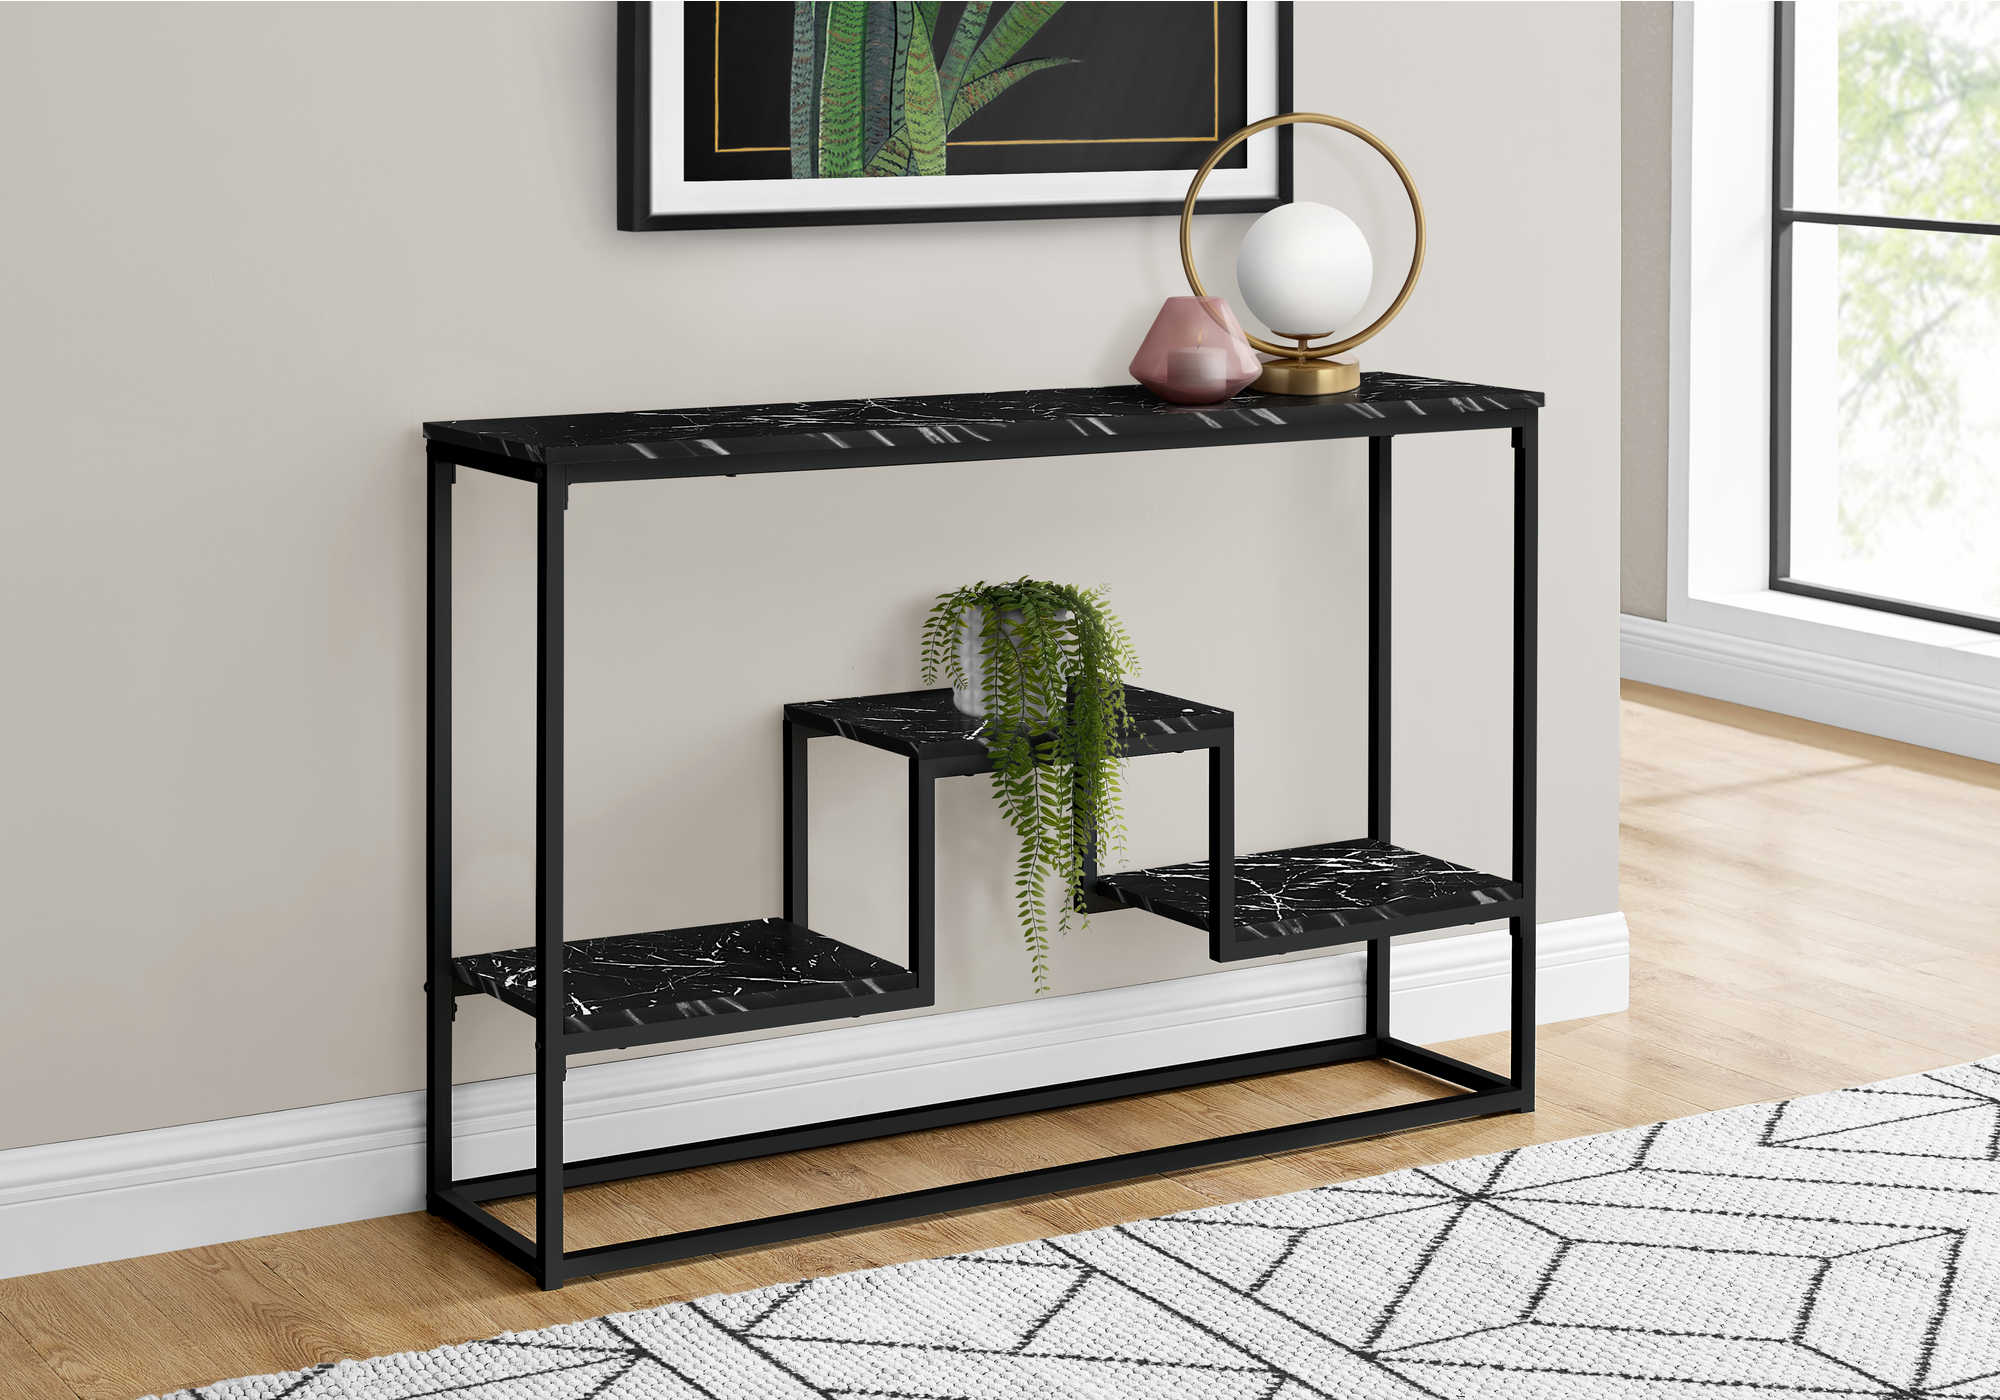 BEDROOM ACCENT CONSOLE TABLE - 48"L / BLACK MARBLE / BLACK METAL CONSOLE